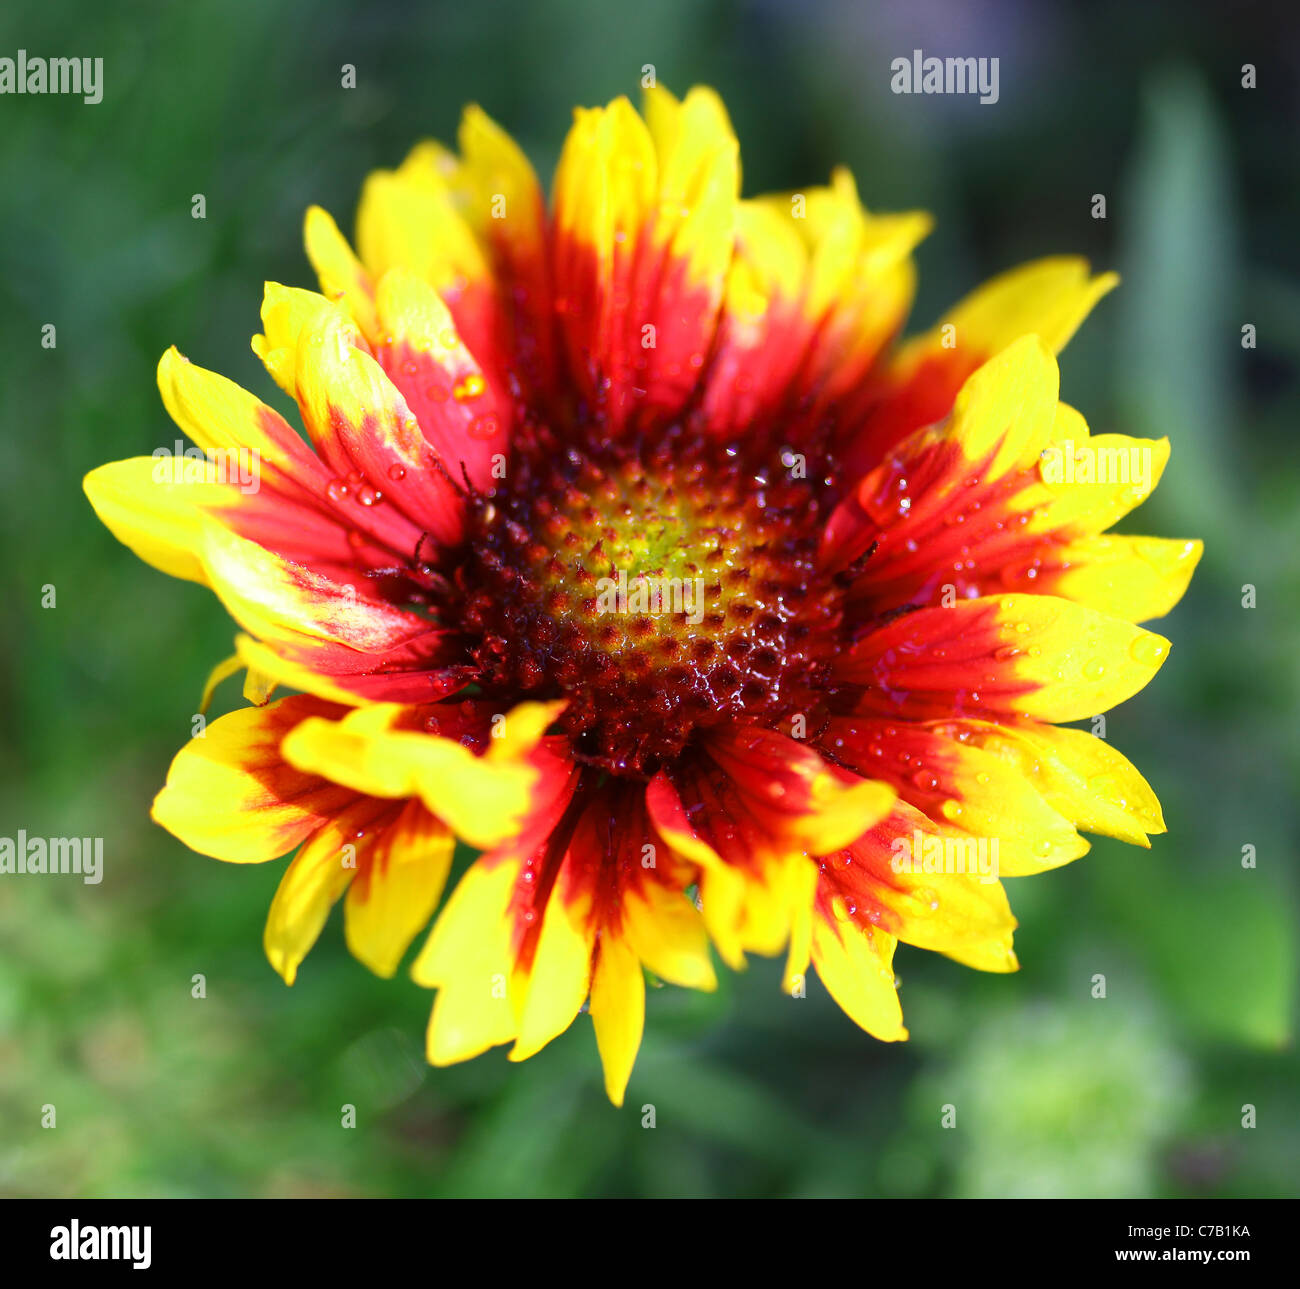 A Blanket flower or Gaillardia with red and yellow petals Stock Photo